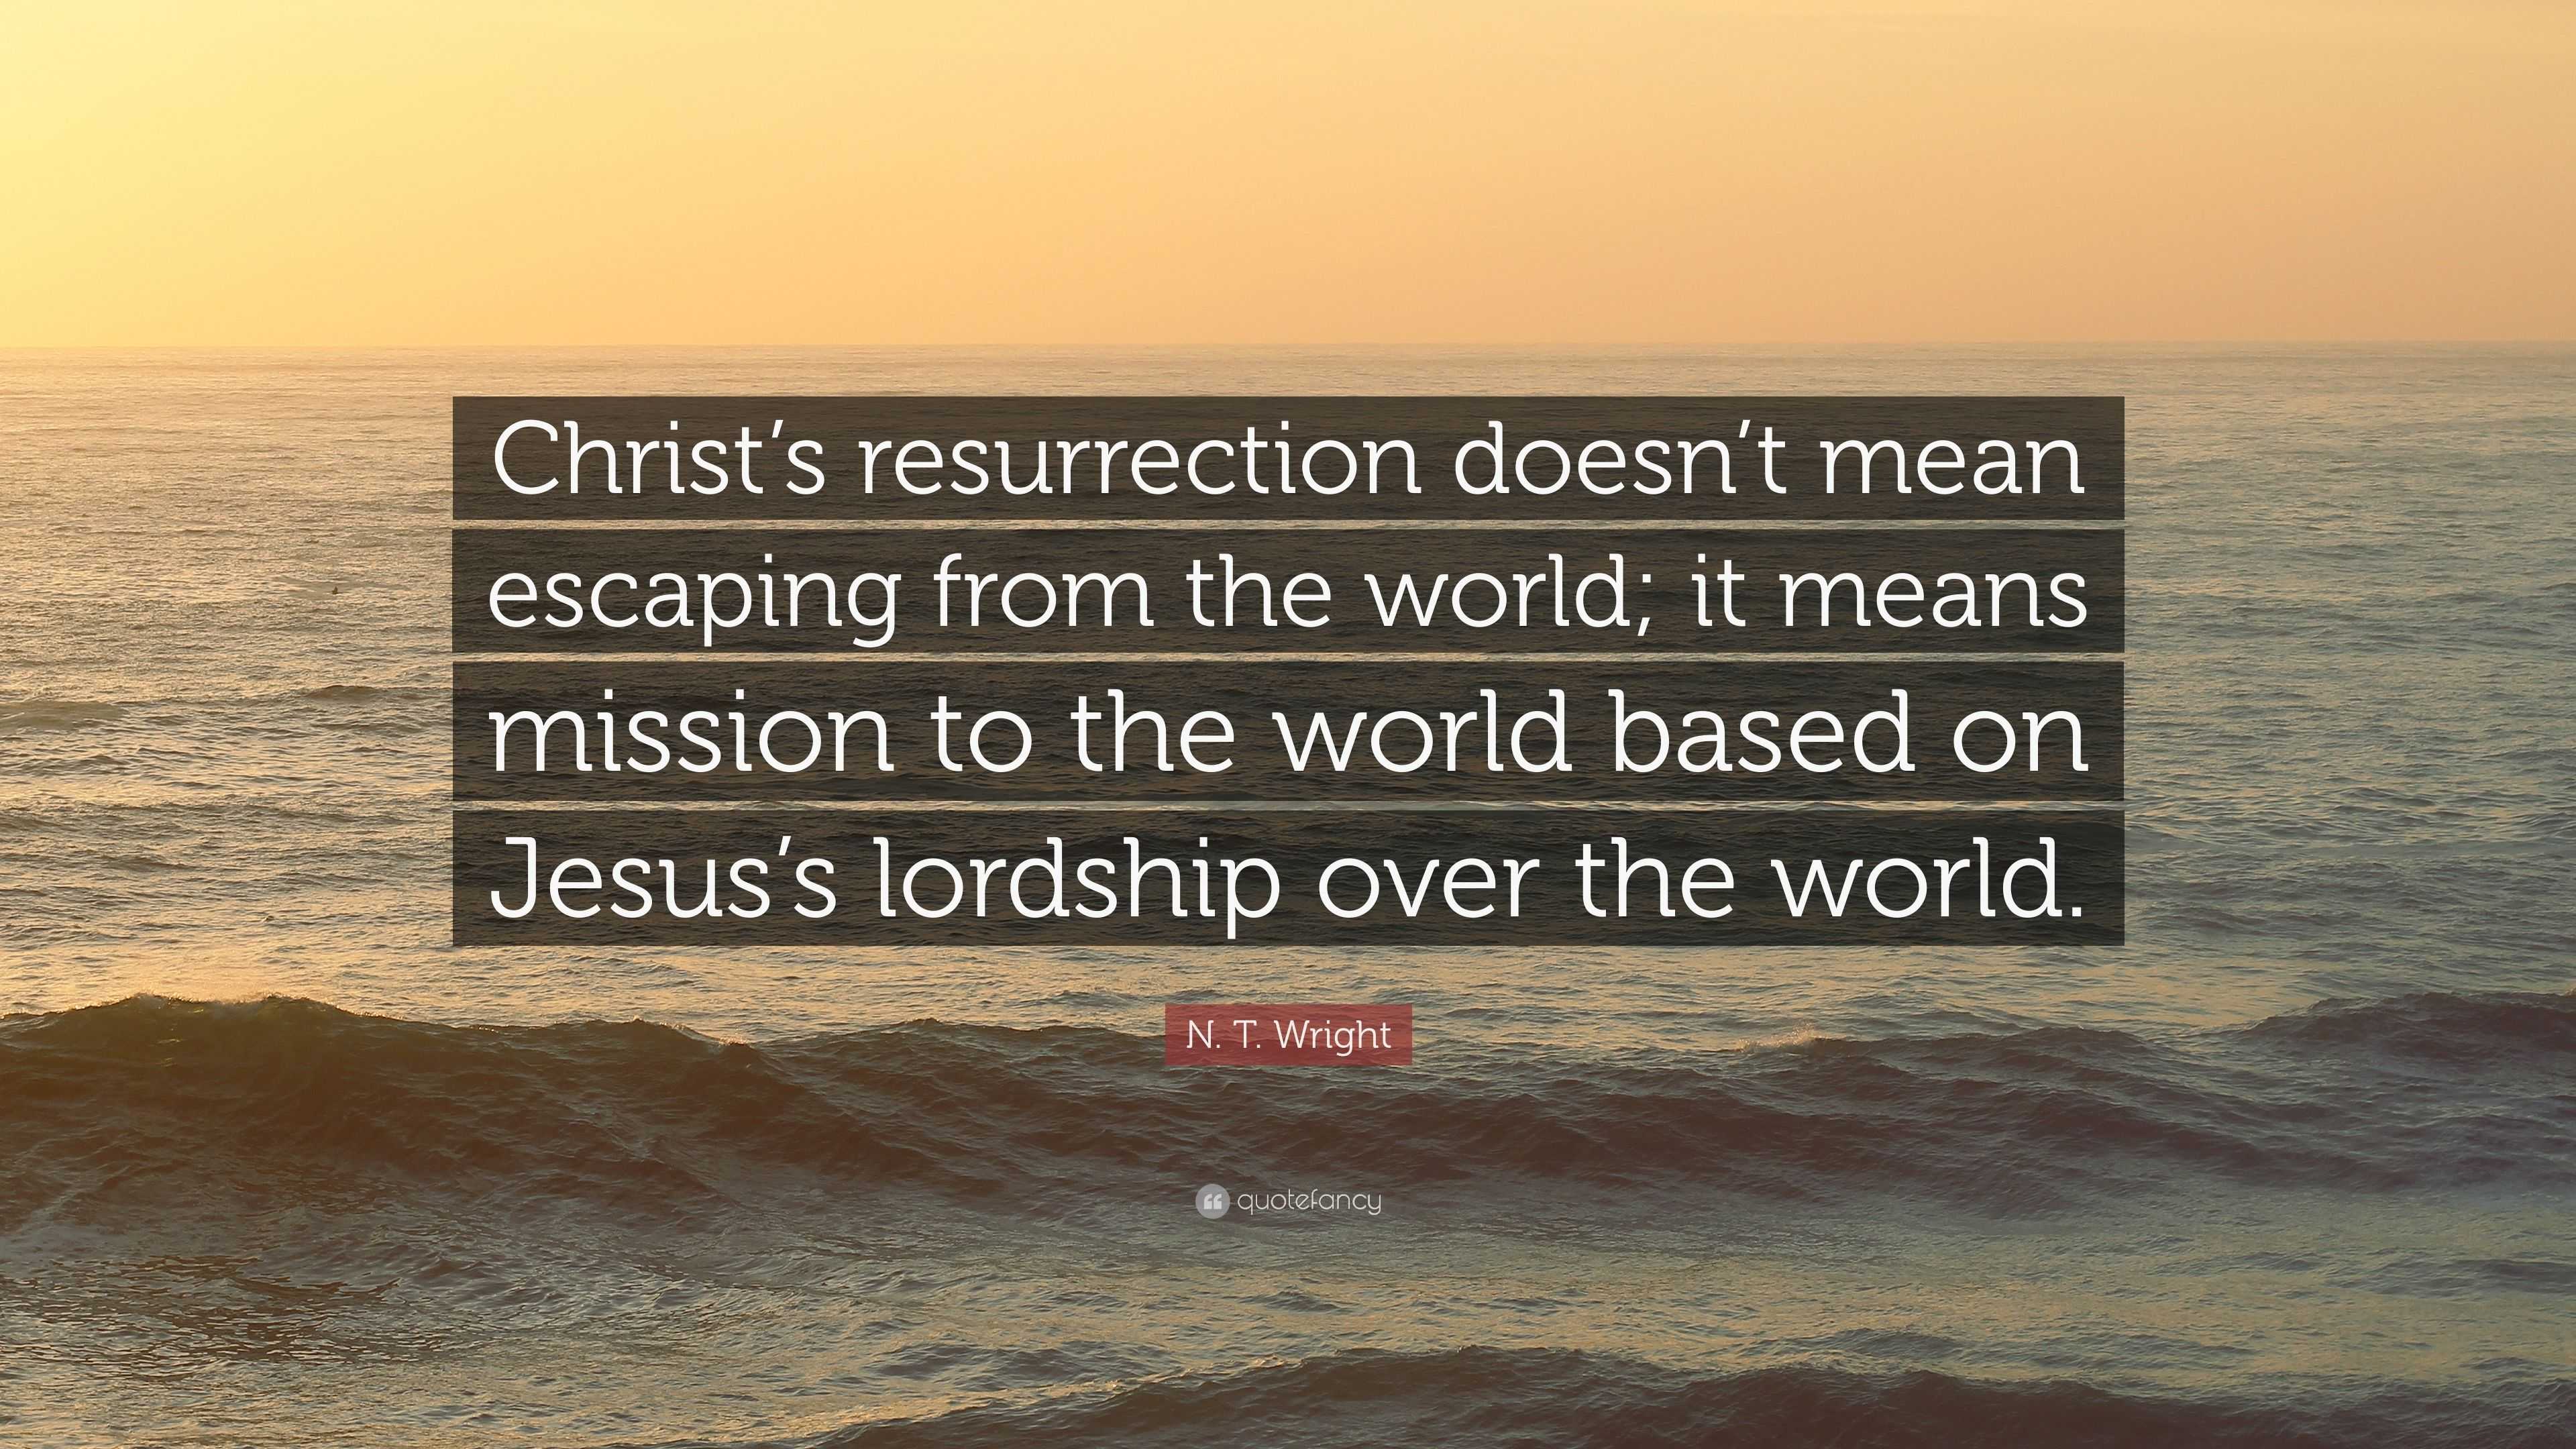 N. T. Wright Quote: “Christ’s resurrection doesn’t mean escaping from ...